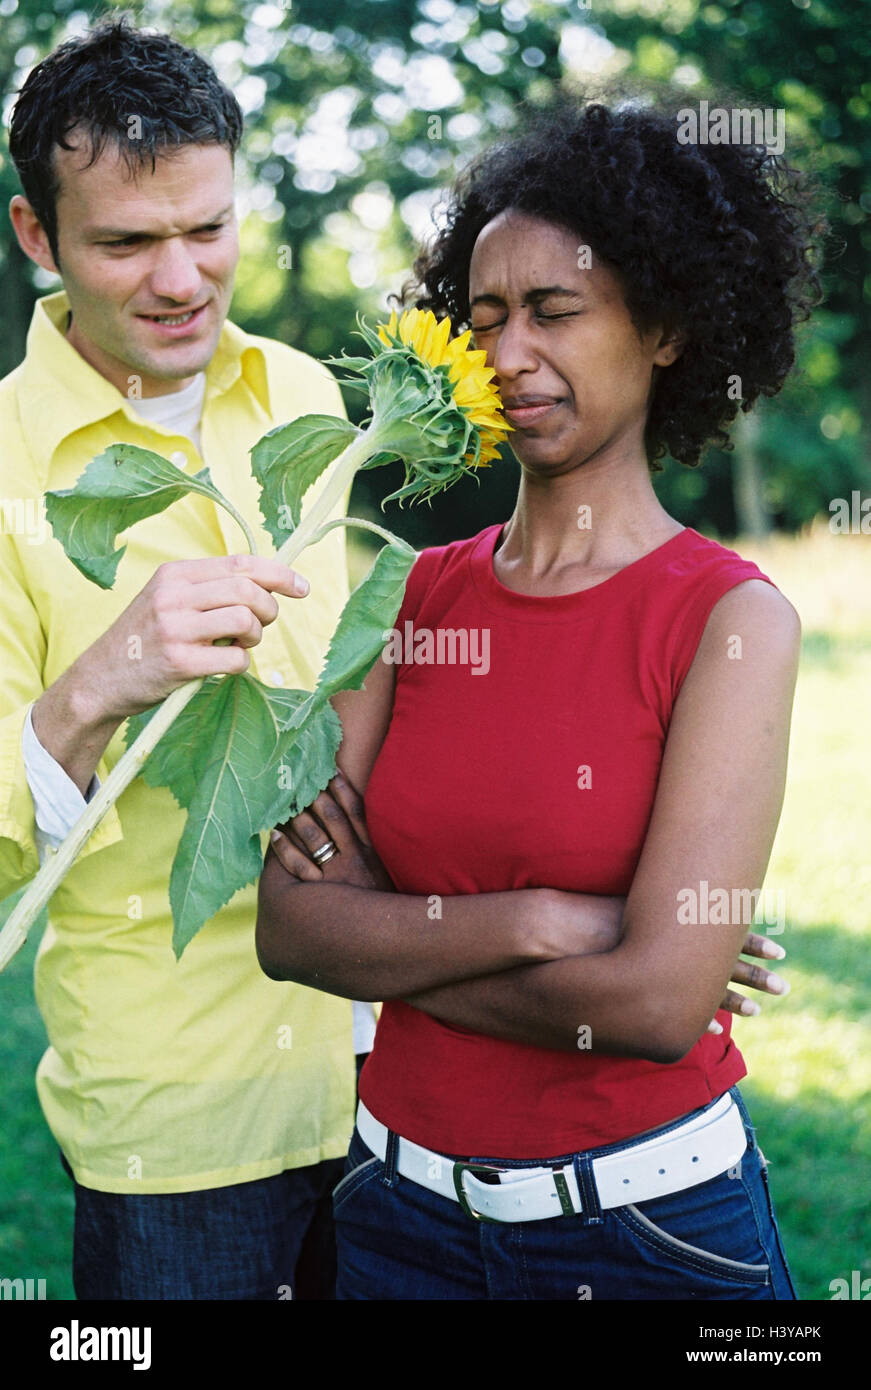 Couple, sunflower, woman, facial play, annoys, friendship, partnership, conflict, fight, mood, expression, displeasure, annoyance, discord, bright period, flower, joke, skin colour, differently, non-whites, swarthy Stock Photo